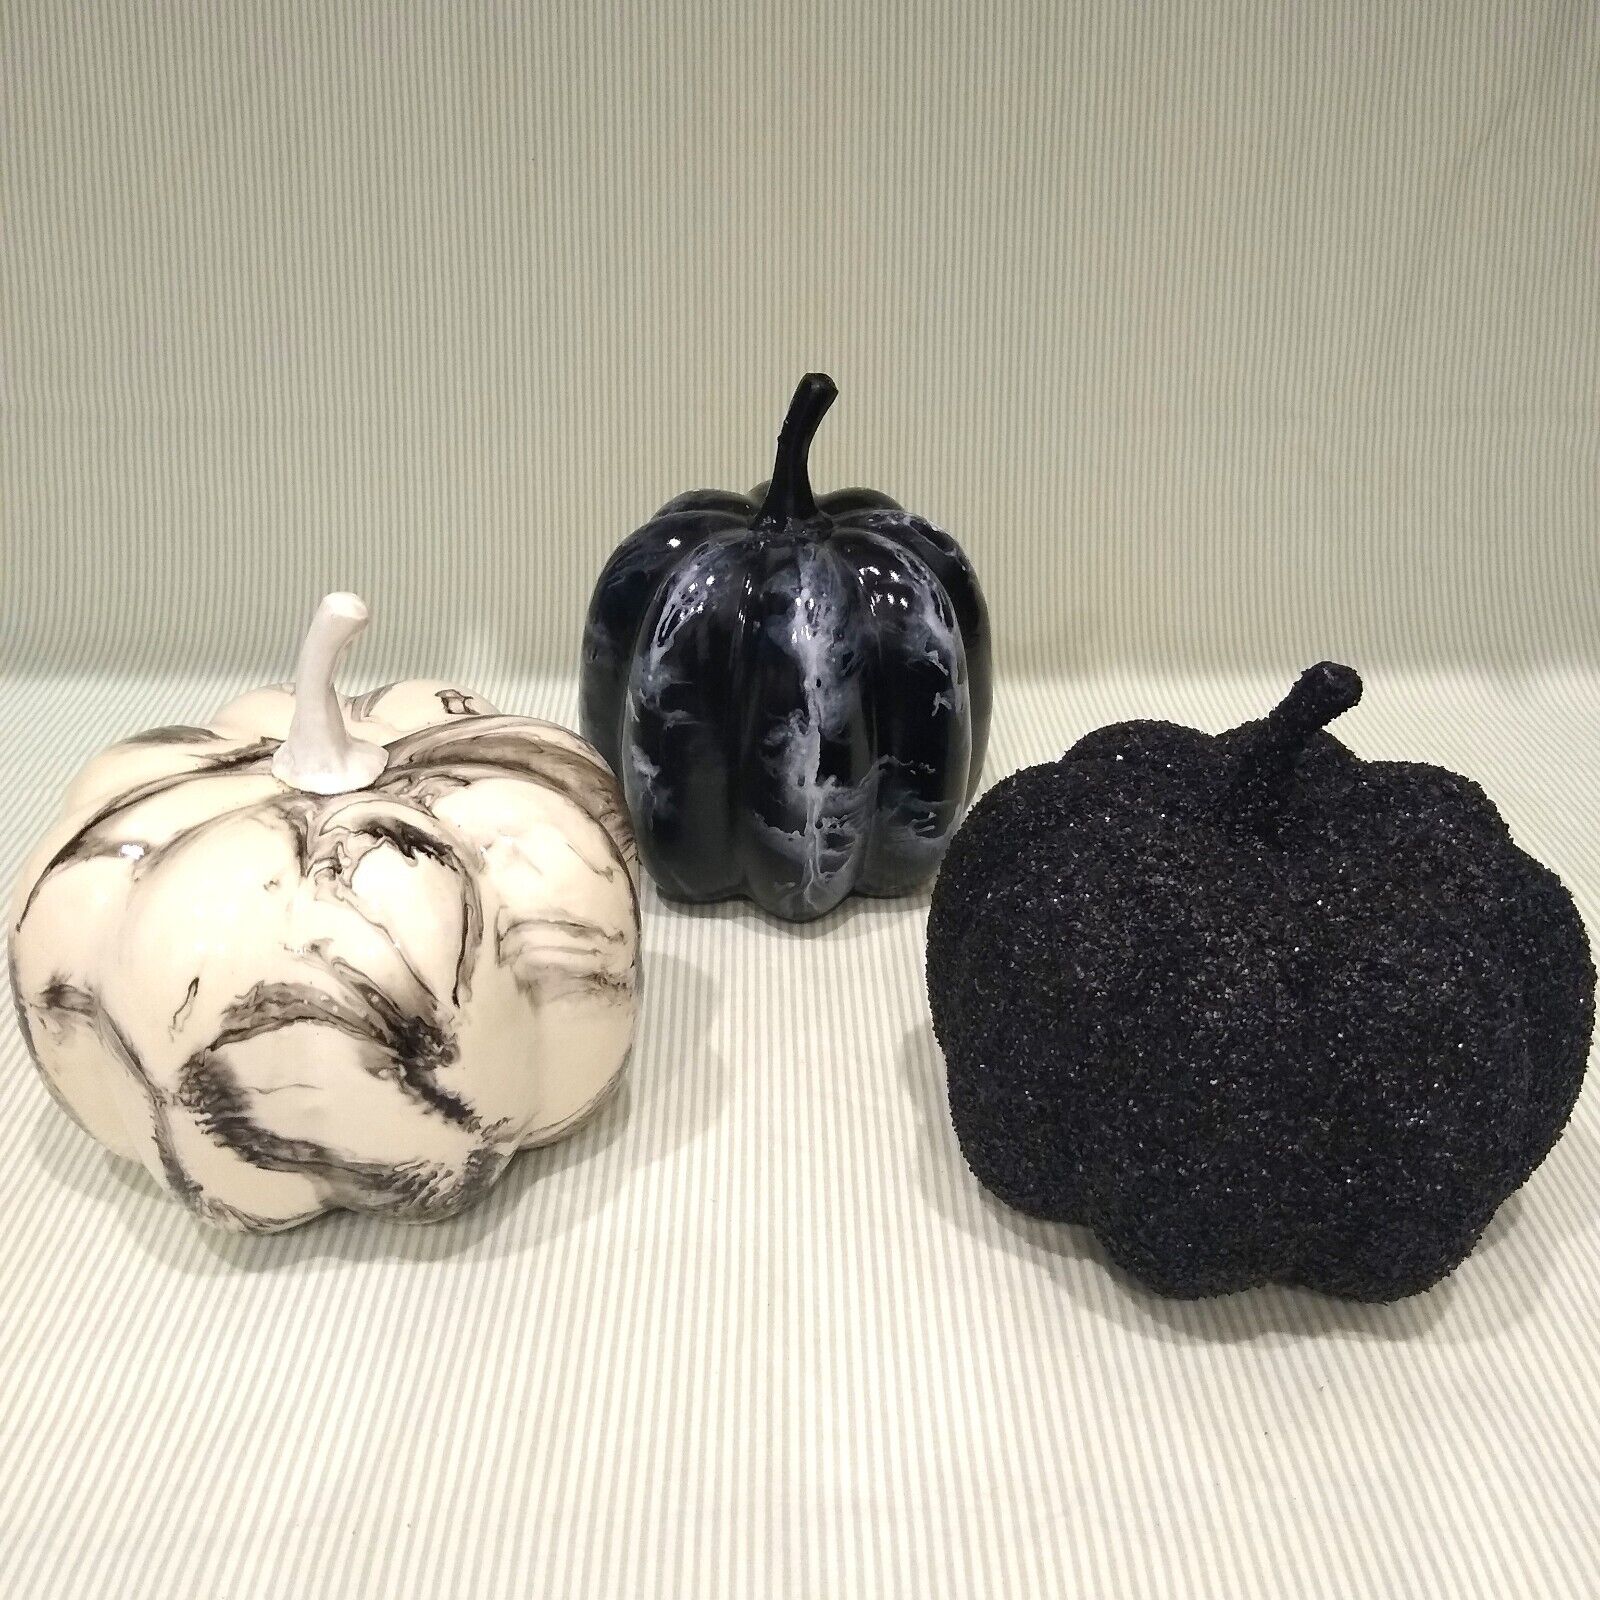 Lot of Pumpkins Halloween Black and White Marbled Look Sparkly Glitter 3